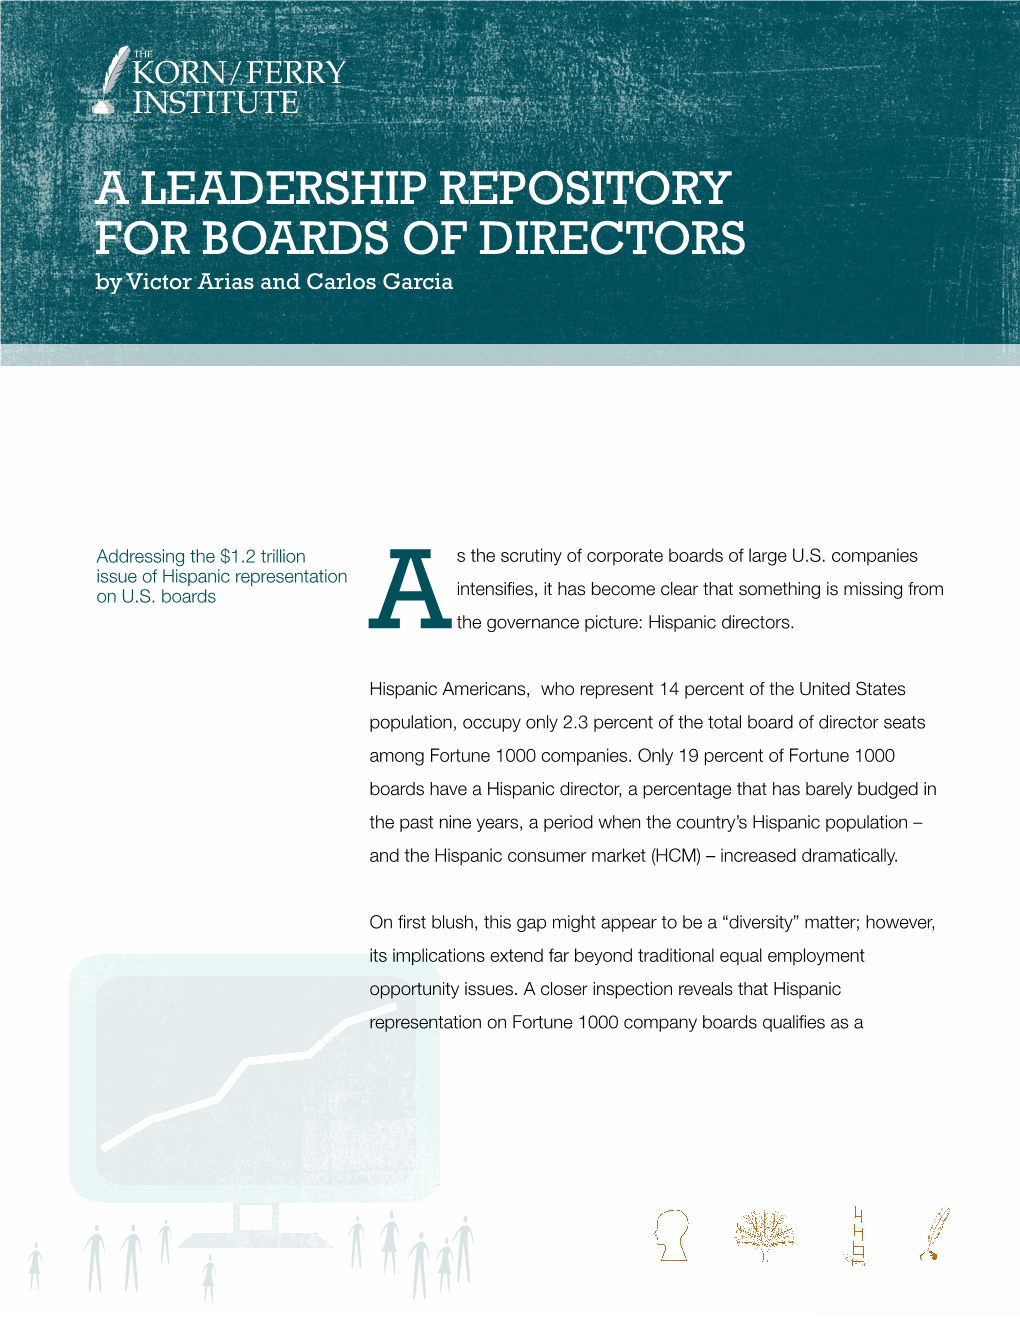 A Leadership Repository for Boards of Directors by Victor Arias and Carlos Garcia